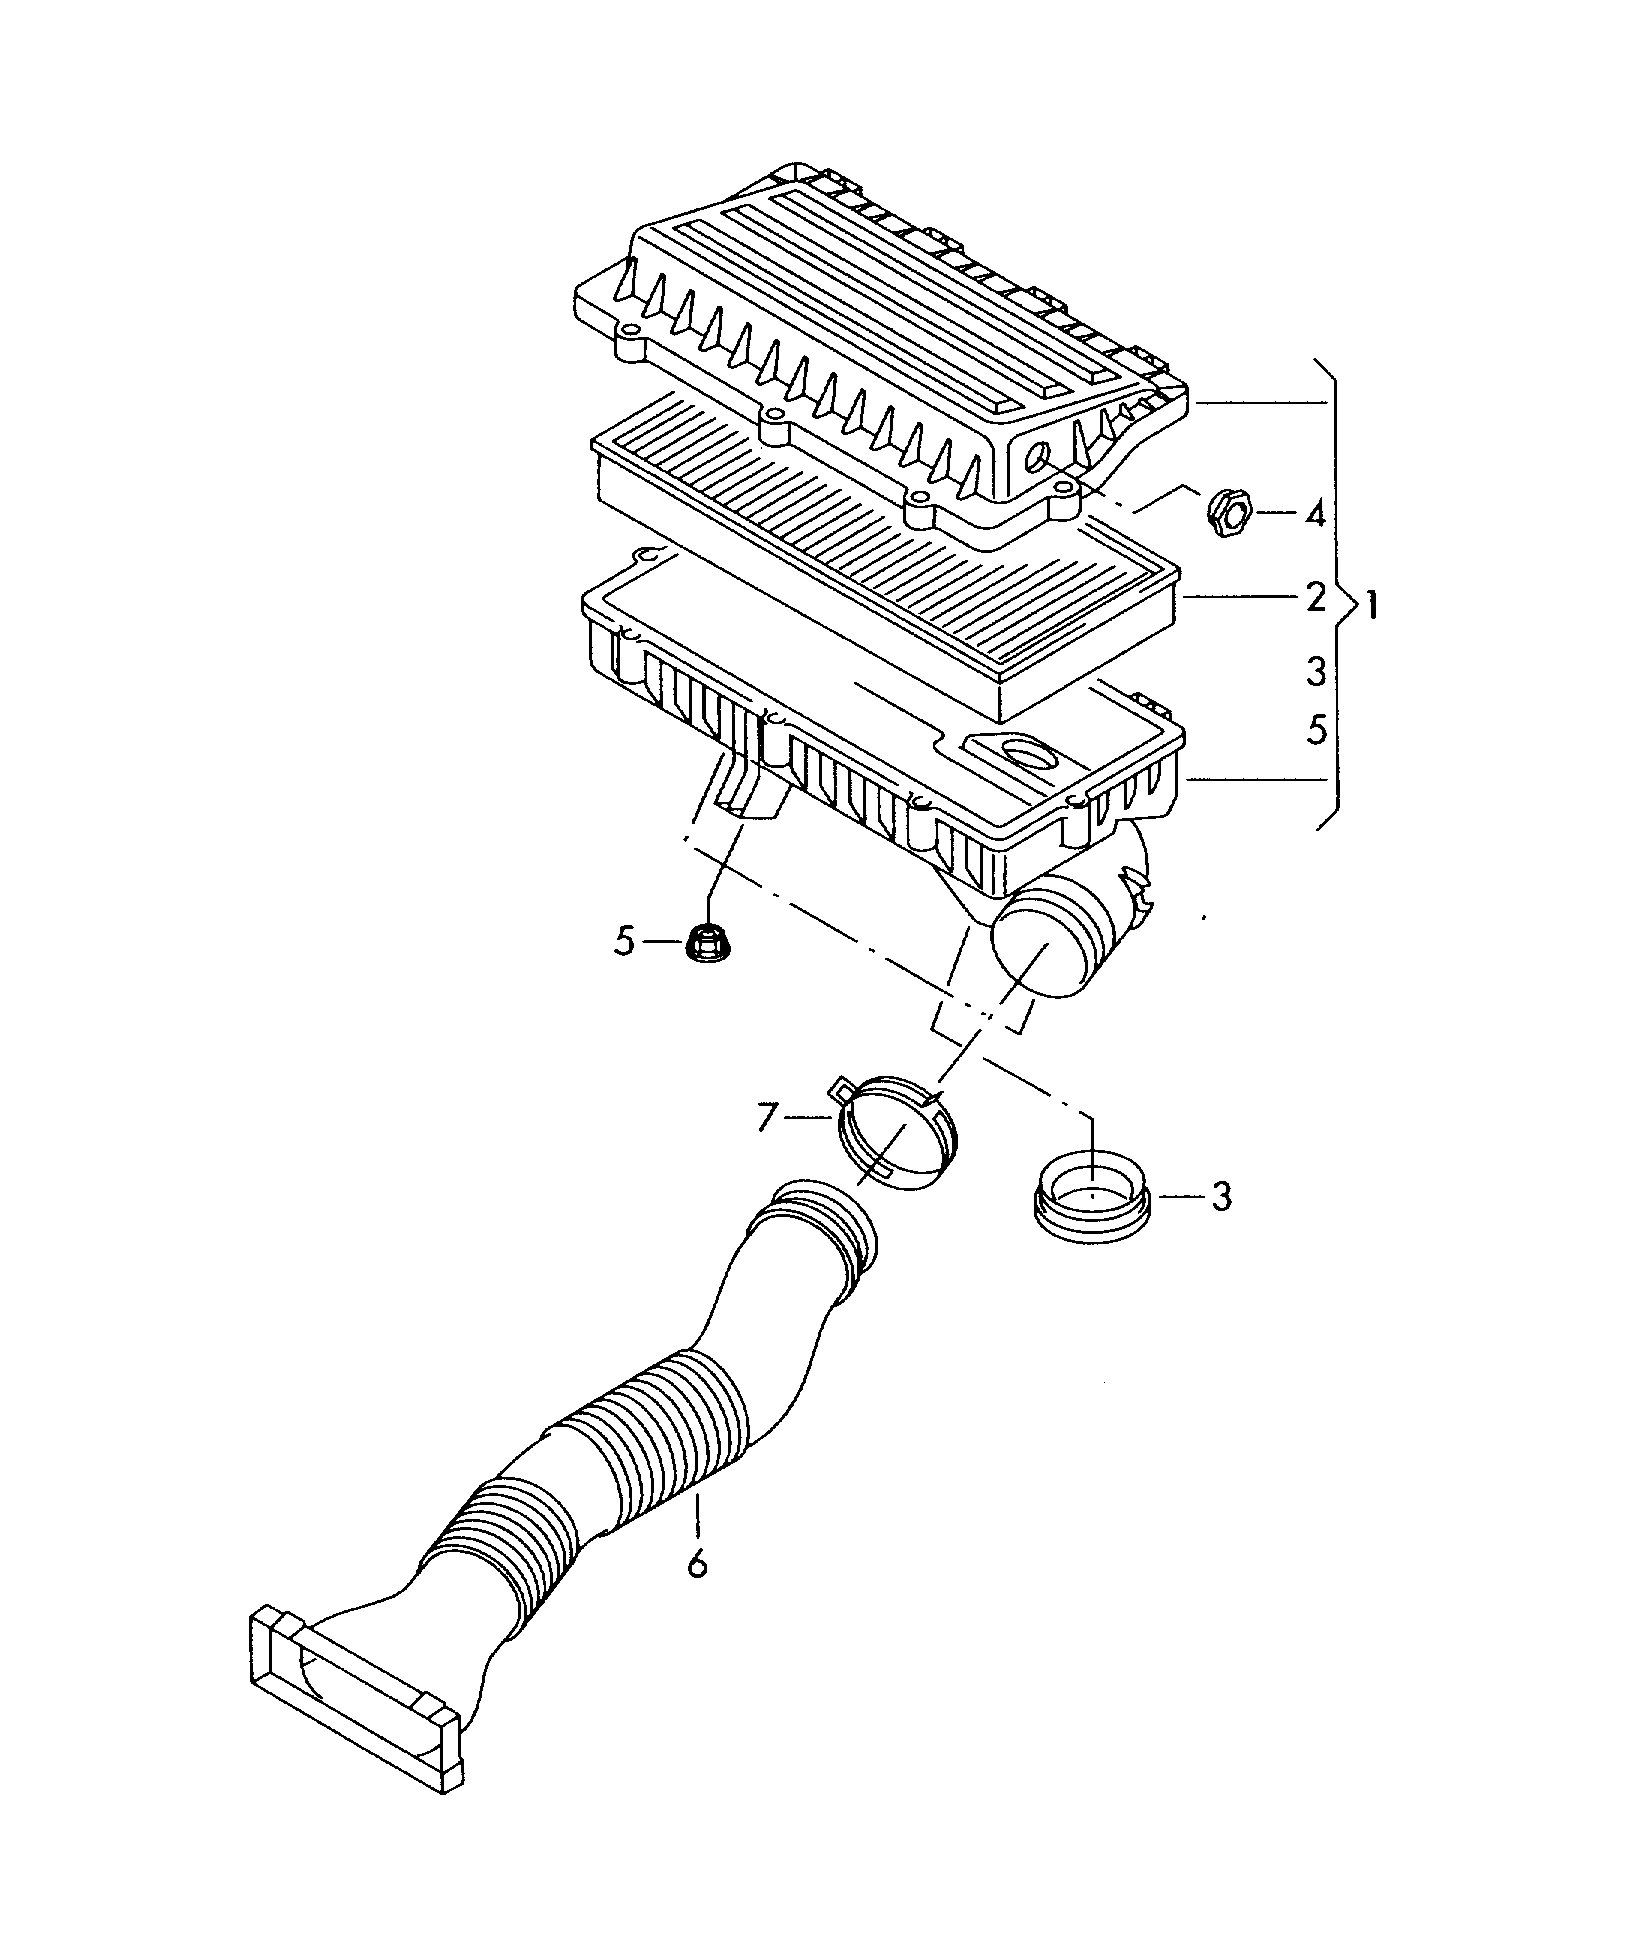 Air filter with connecting<br>parts 1.4ltr. - Golf/Variant/4Motion - golf